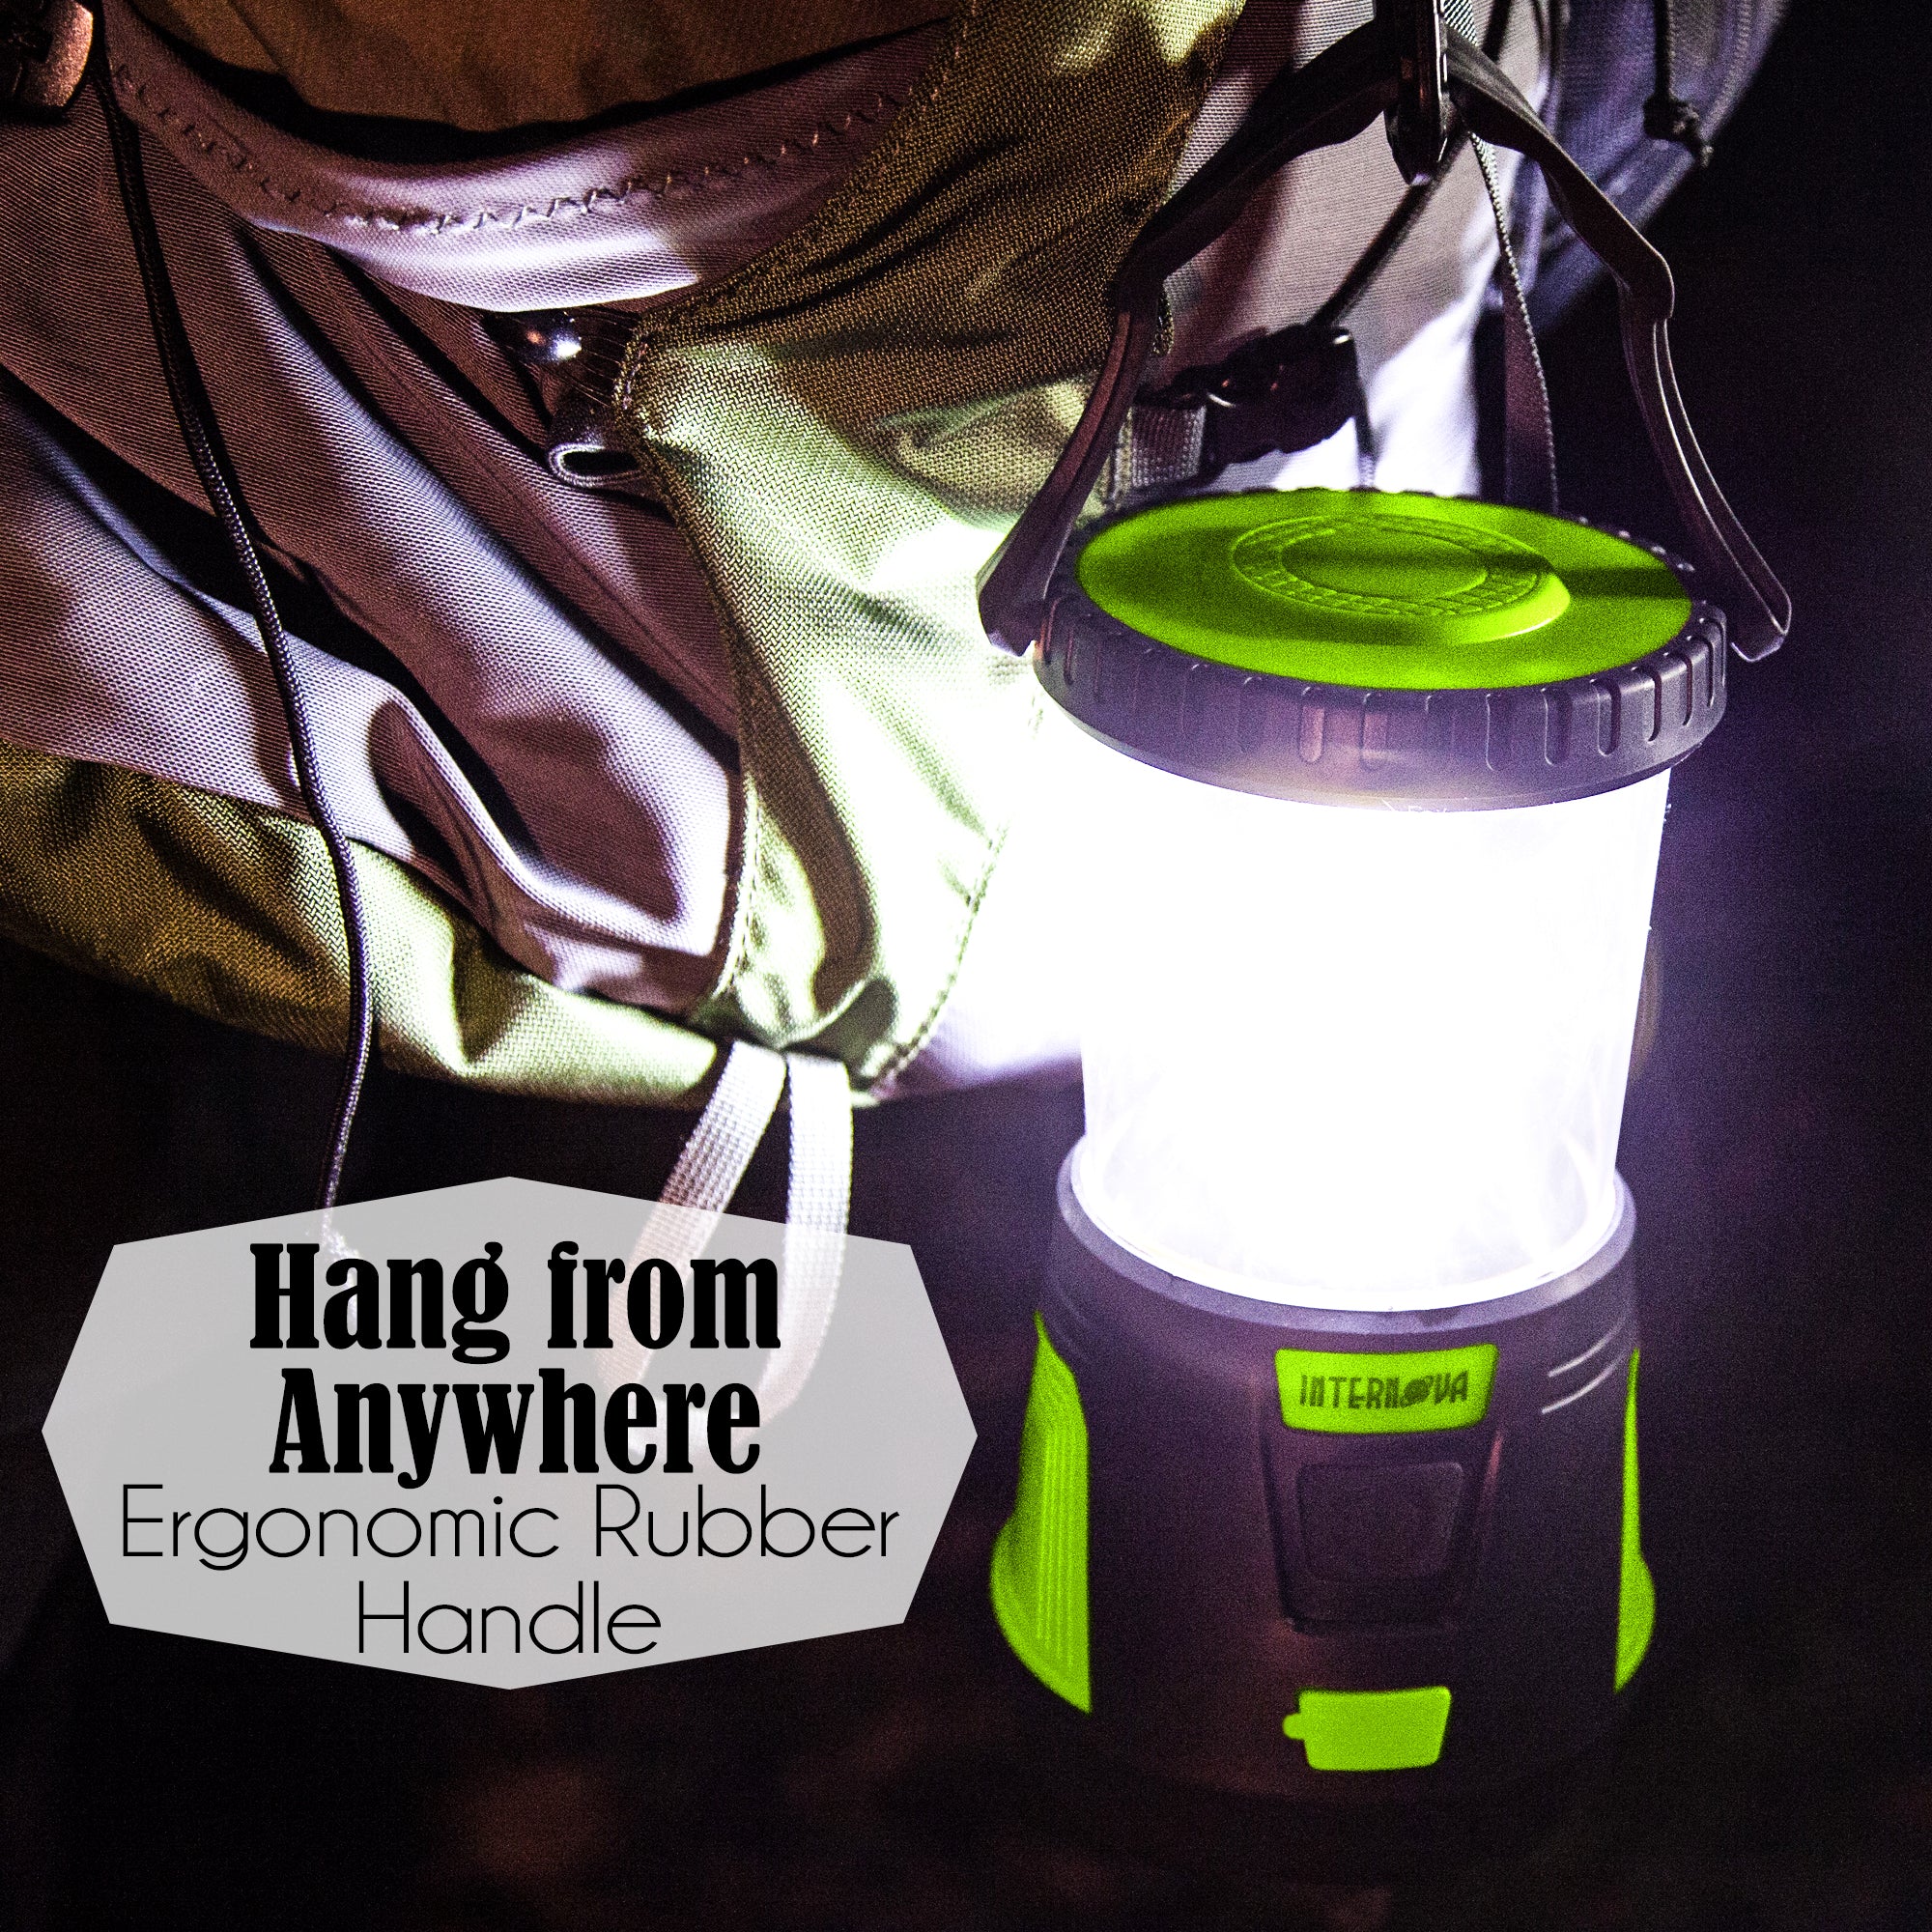 Orion Rechargeable LED Survival Lantern and Power Bank - Intervine